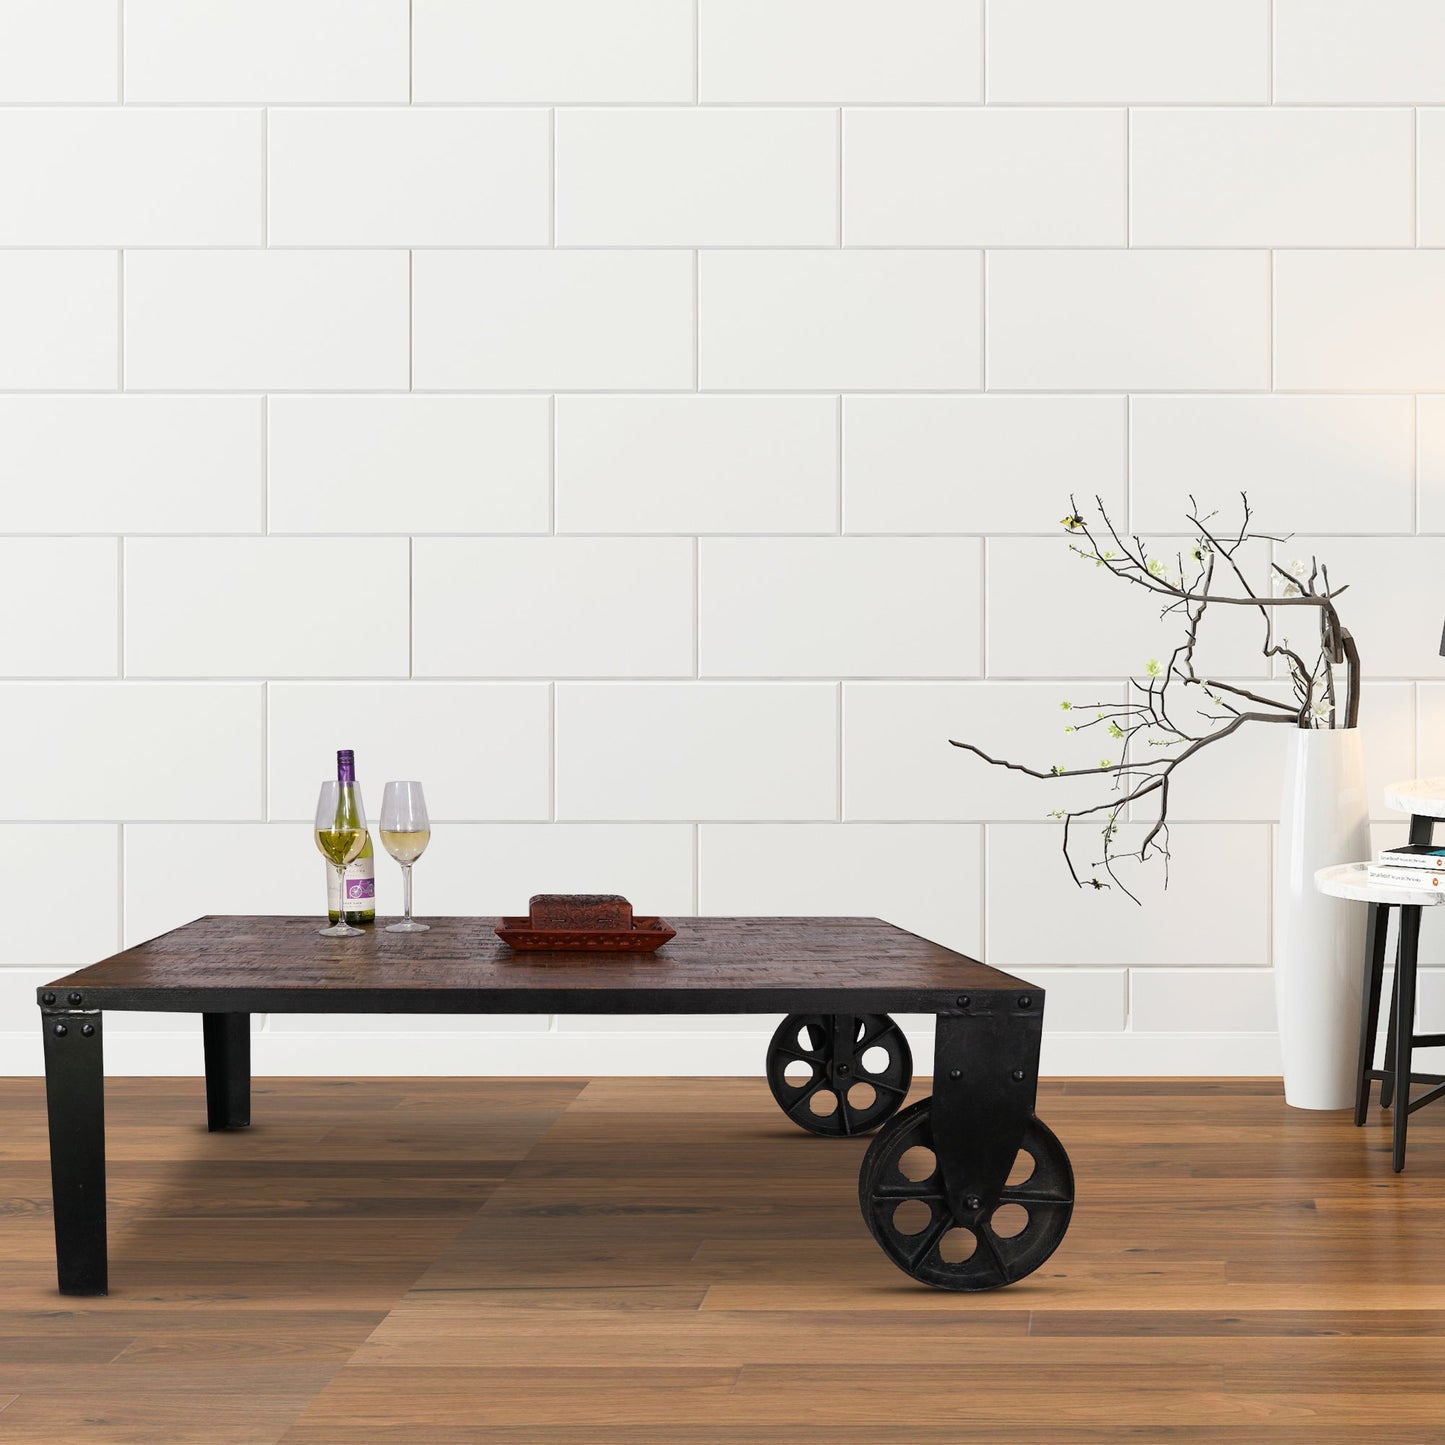 Rustic Industrial Cart Style Coffee Table with 2 wheels - Stylla London